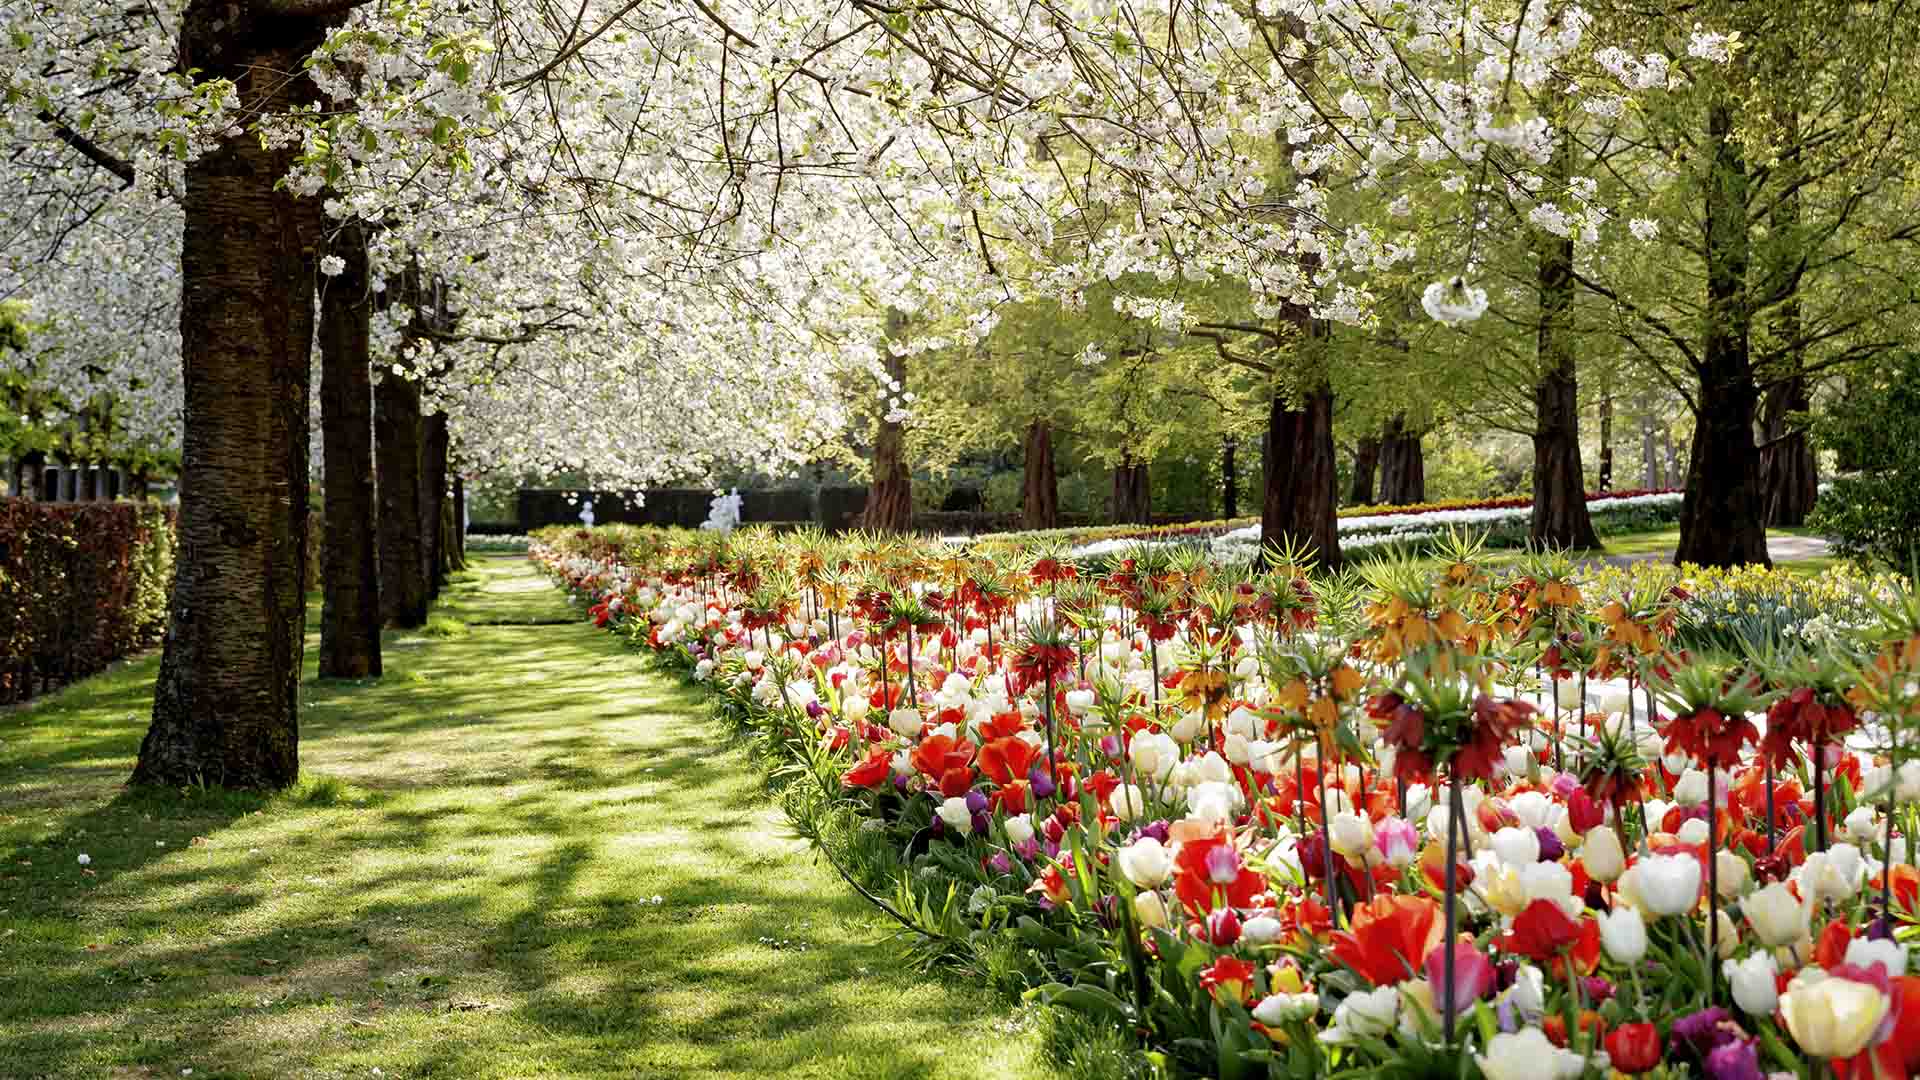 You Can Now Take a Virtual Tour of The Netherlands' Biggest Tulip Garden